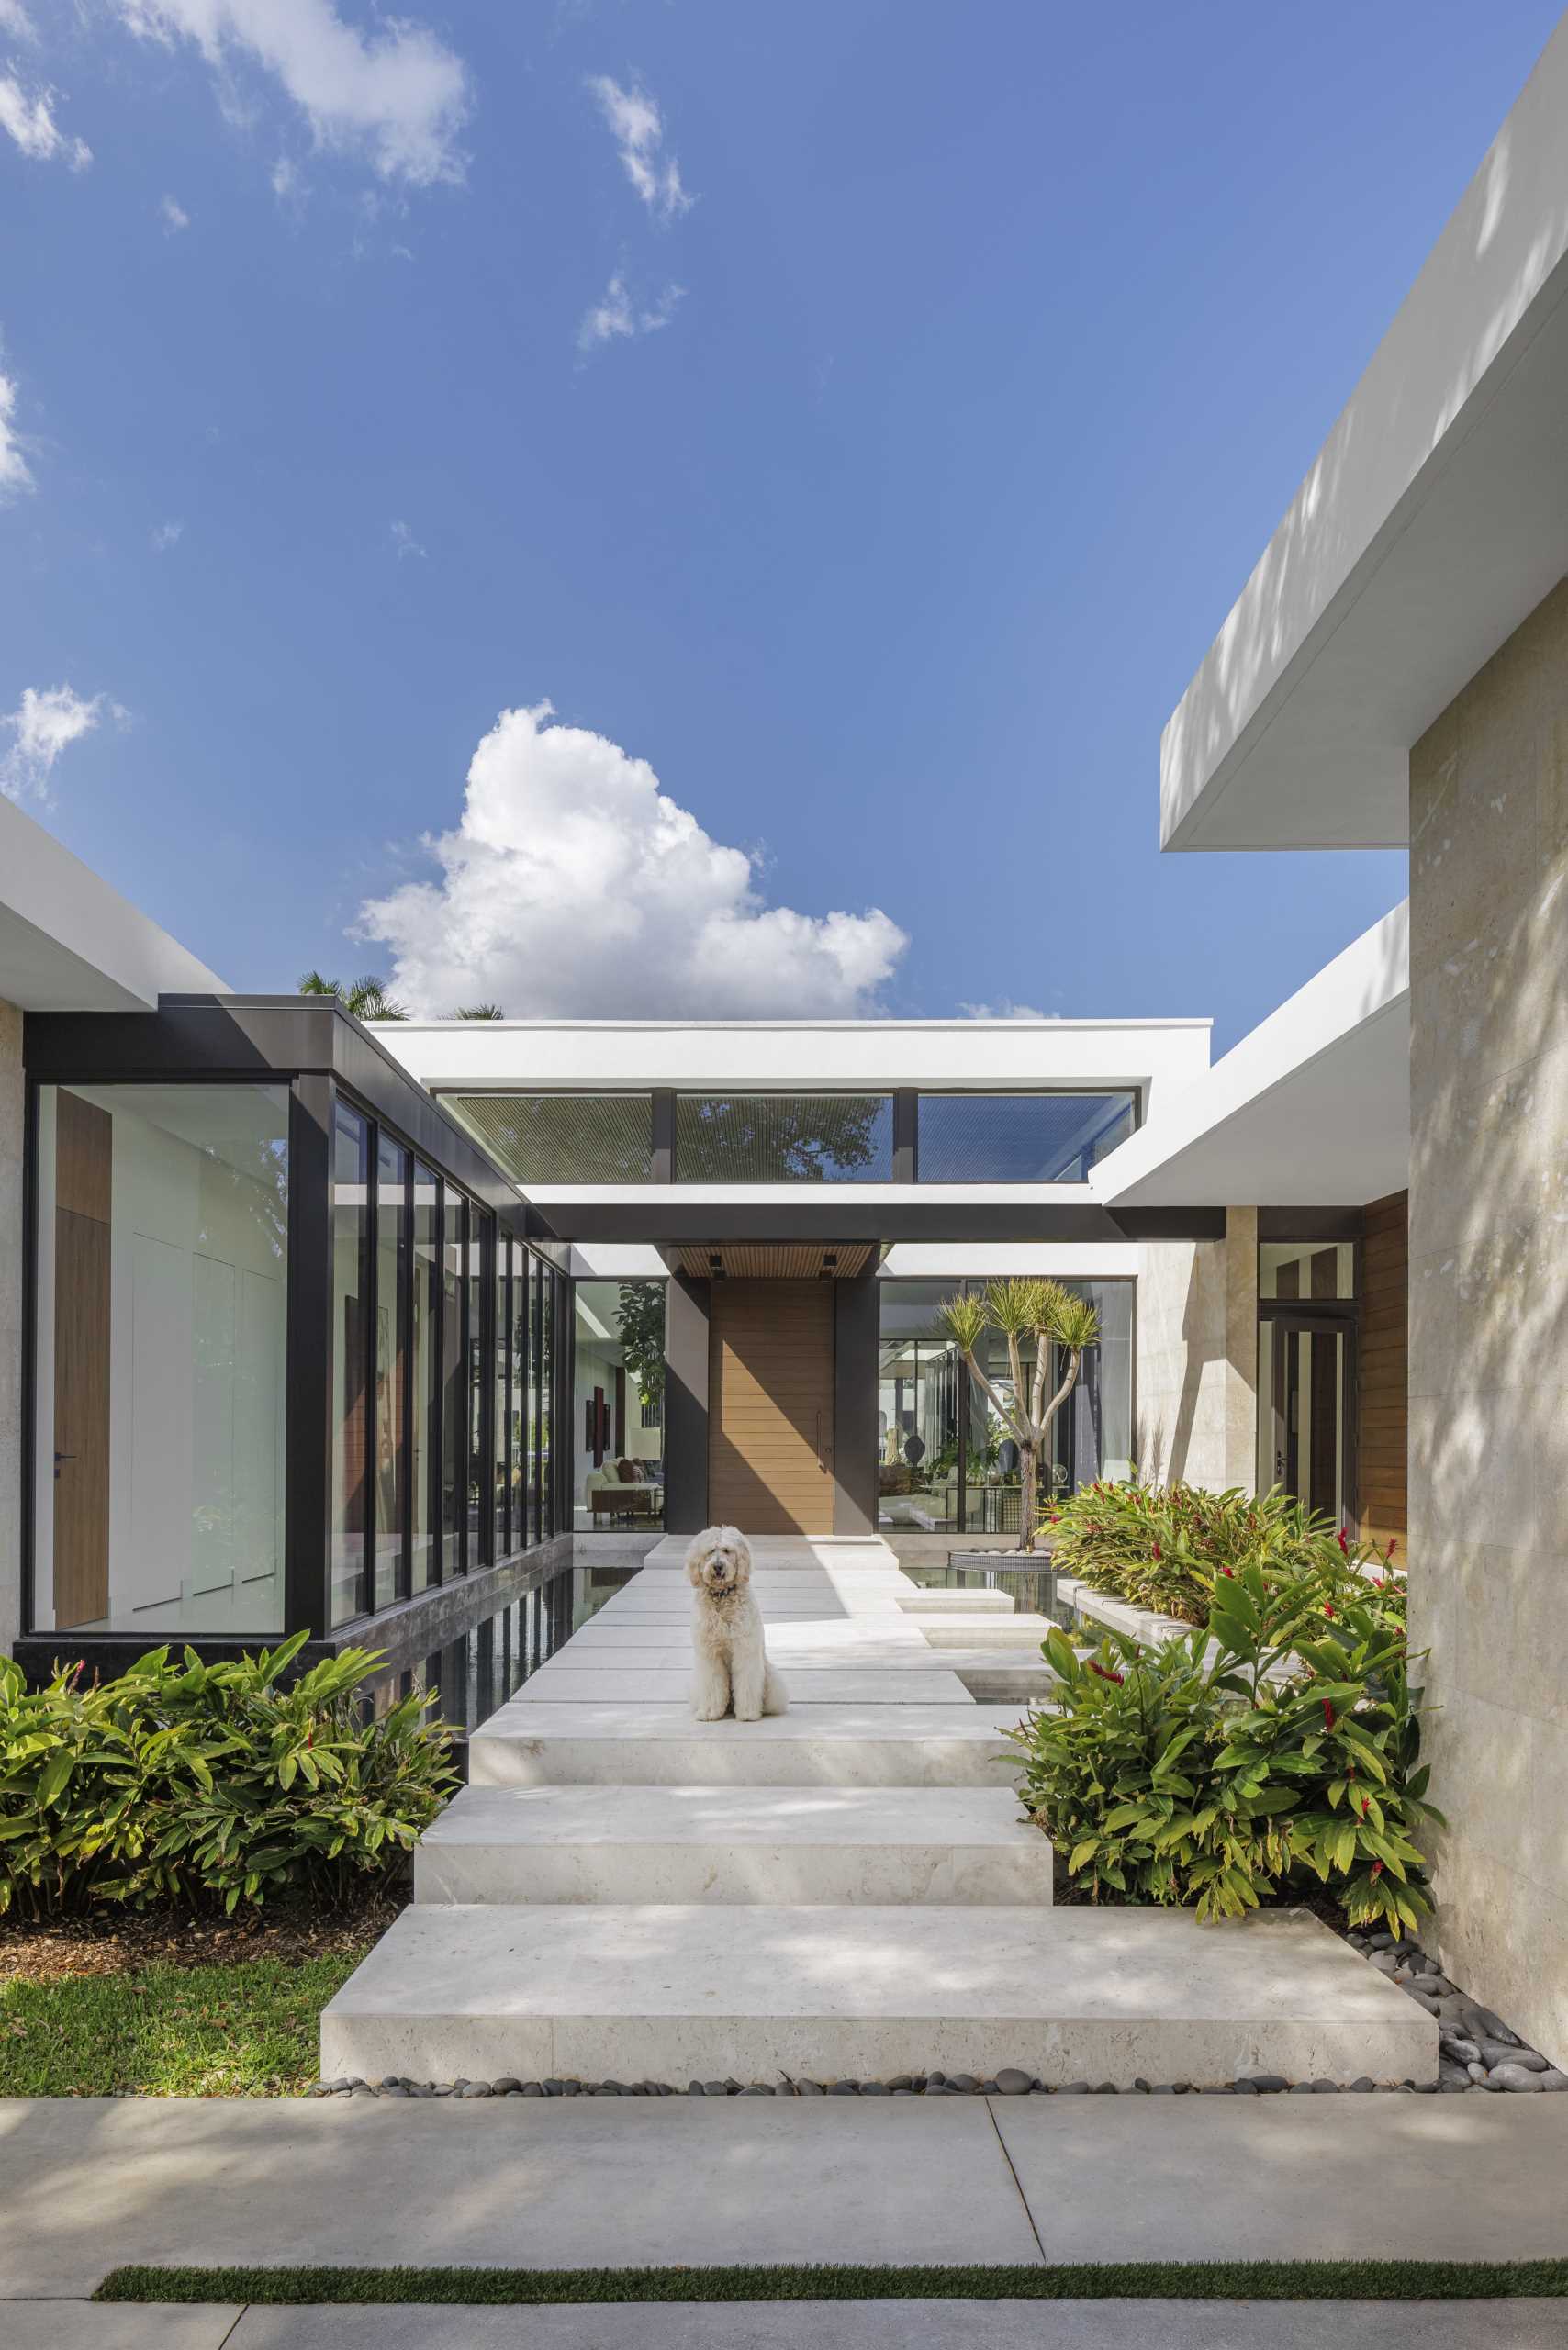 A series of floating concrete steps lead across a pond and guide visitors to the front door. Floor-to-ceiling windows provide a glimpse of the interior.